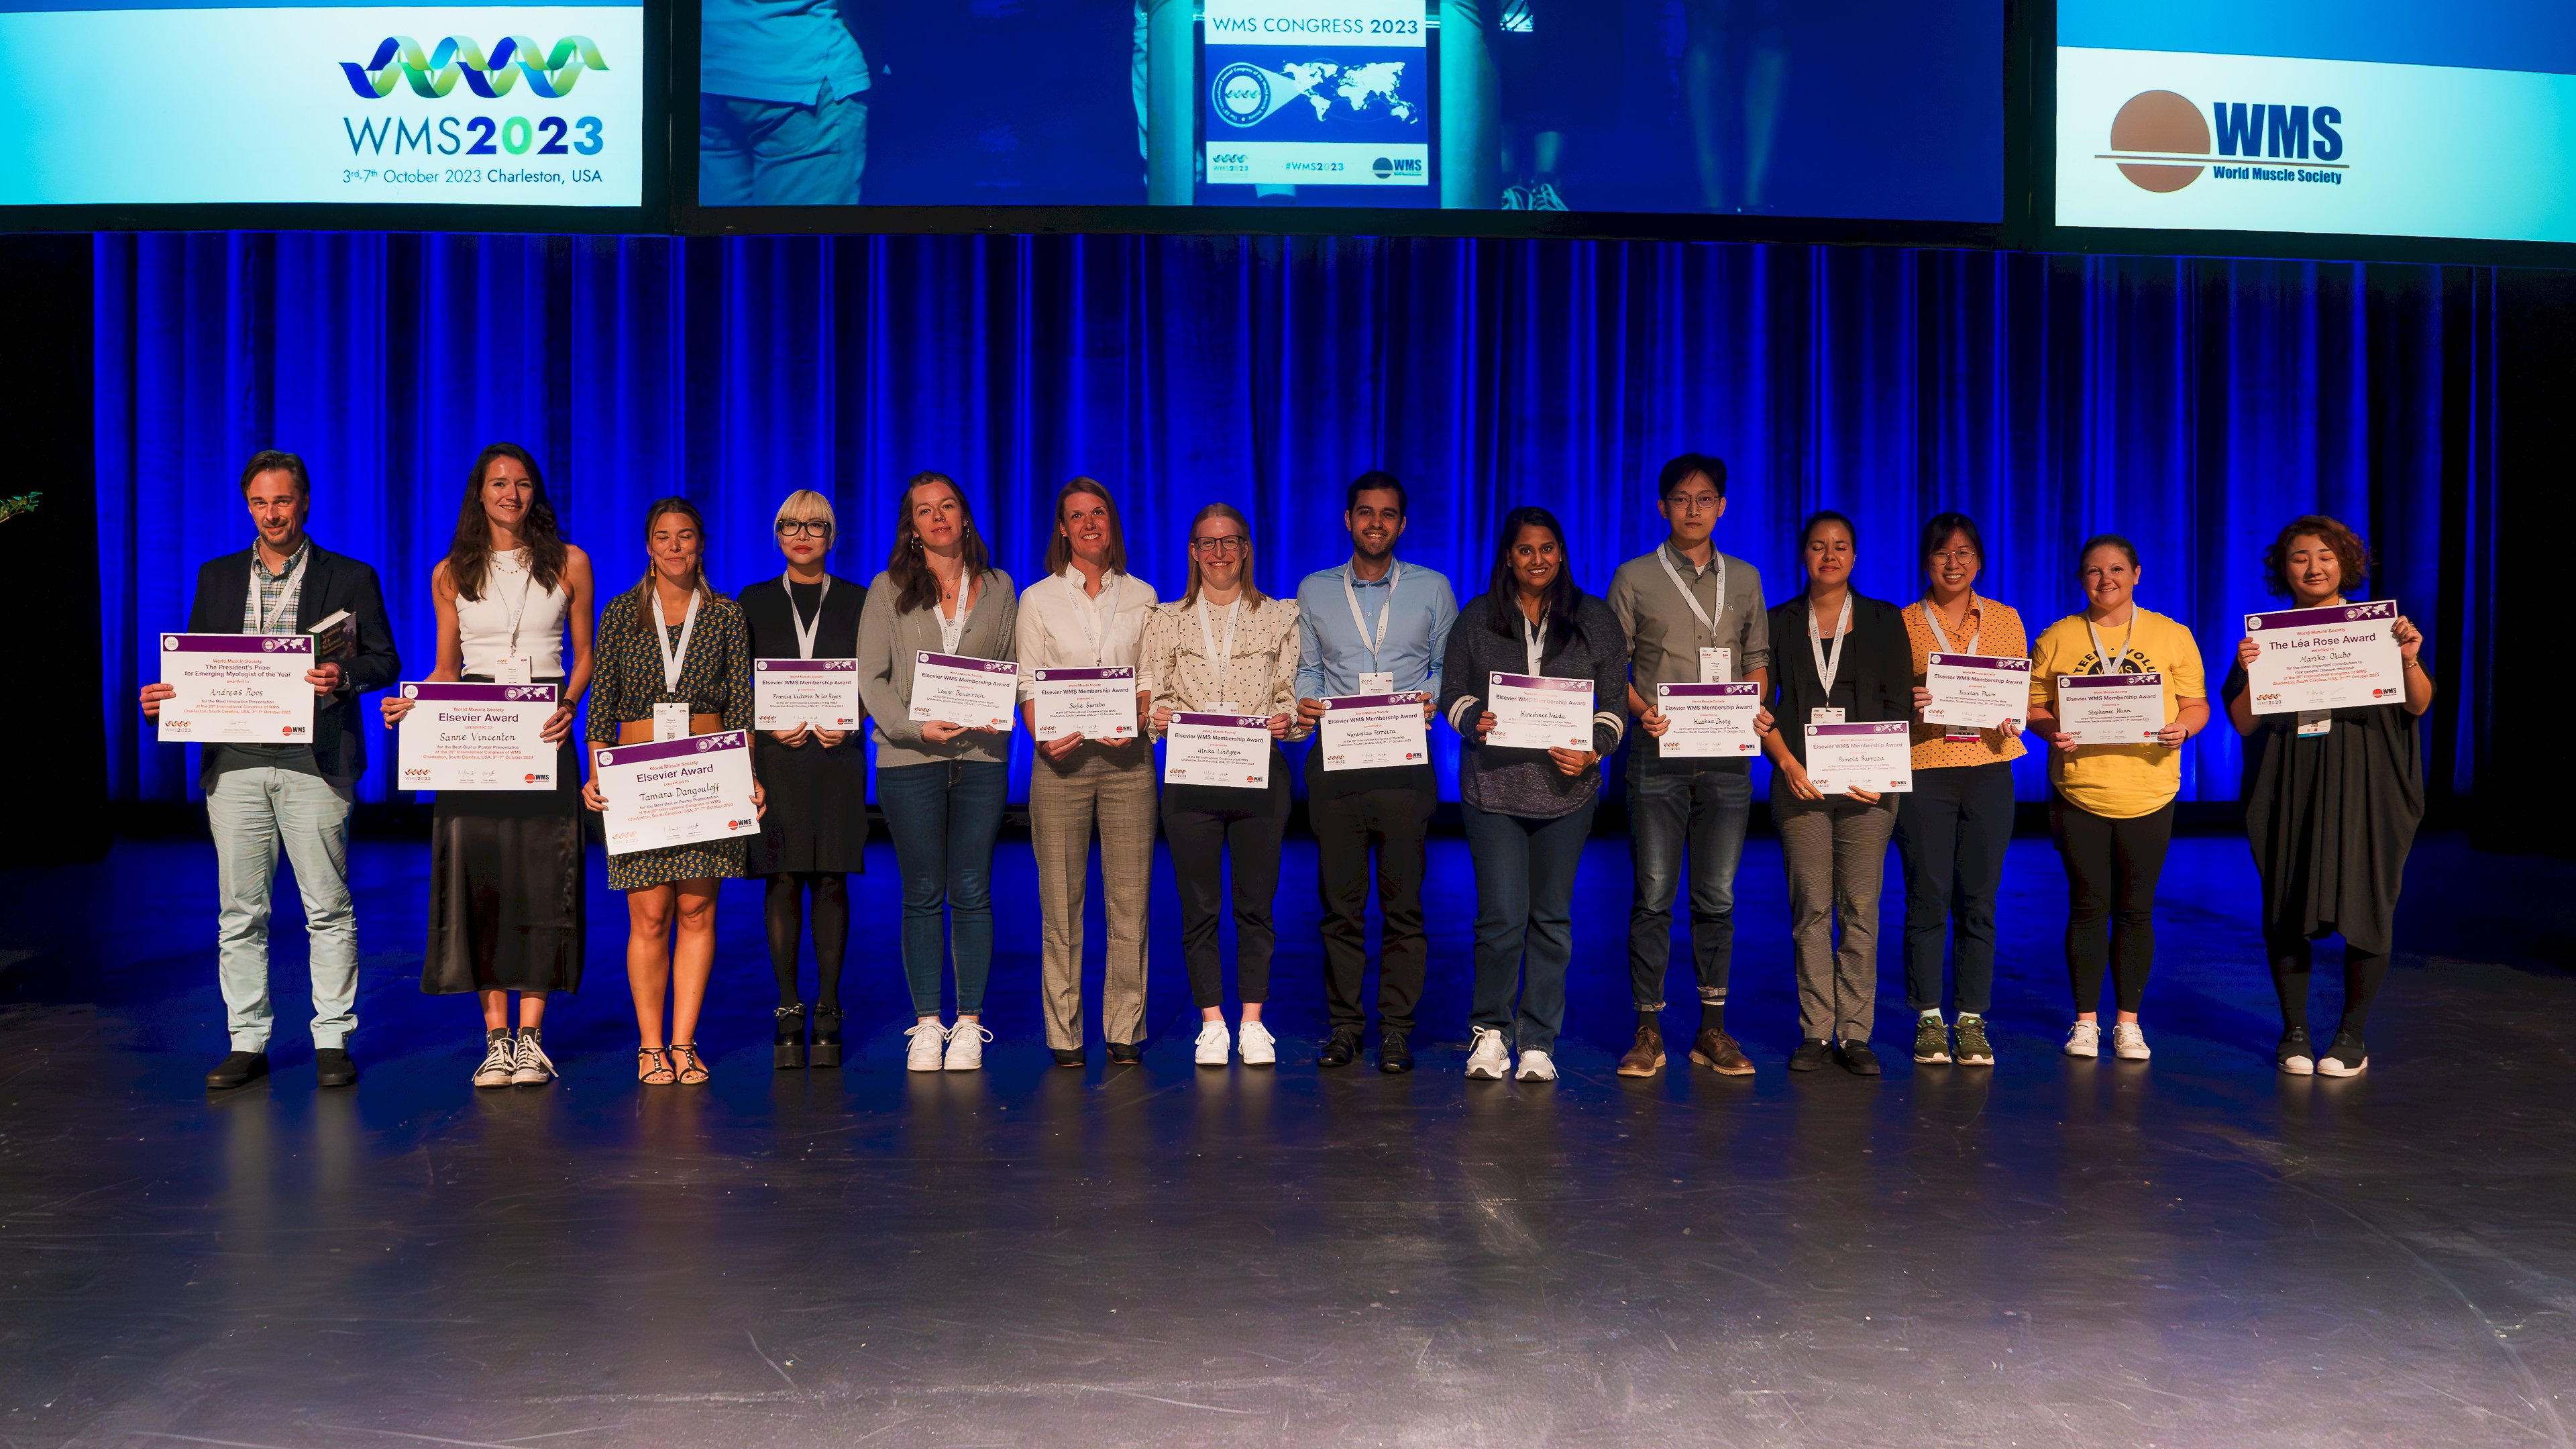 Prize winners on stage, each holding an A3 certificate in front of a blue backdrop